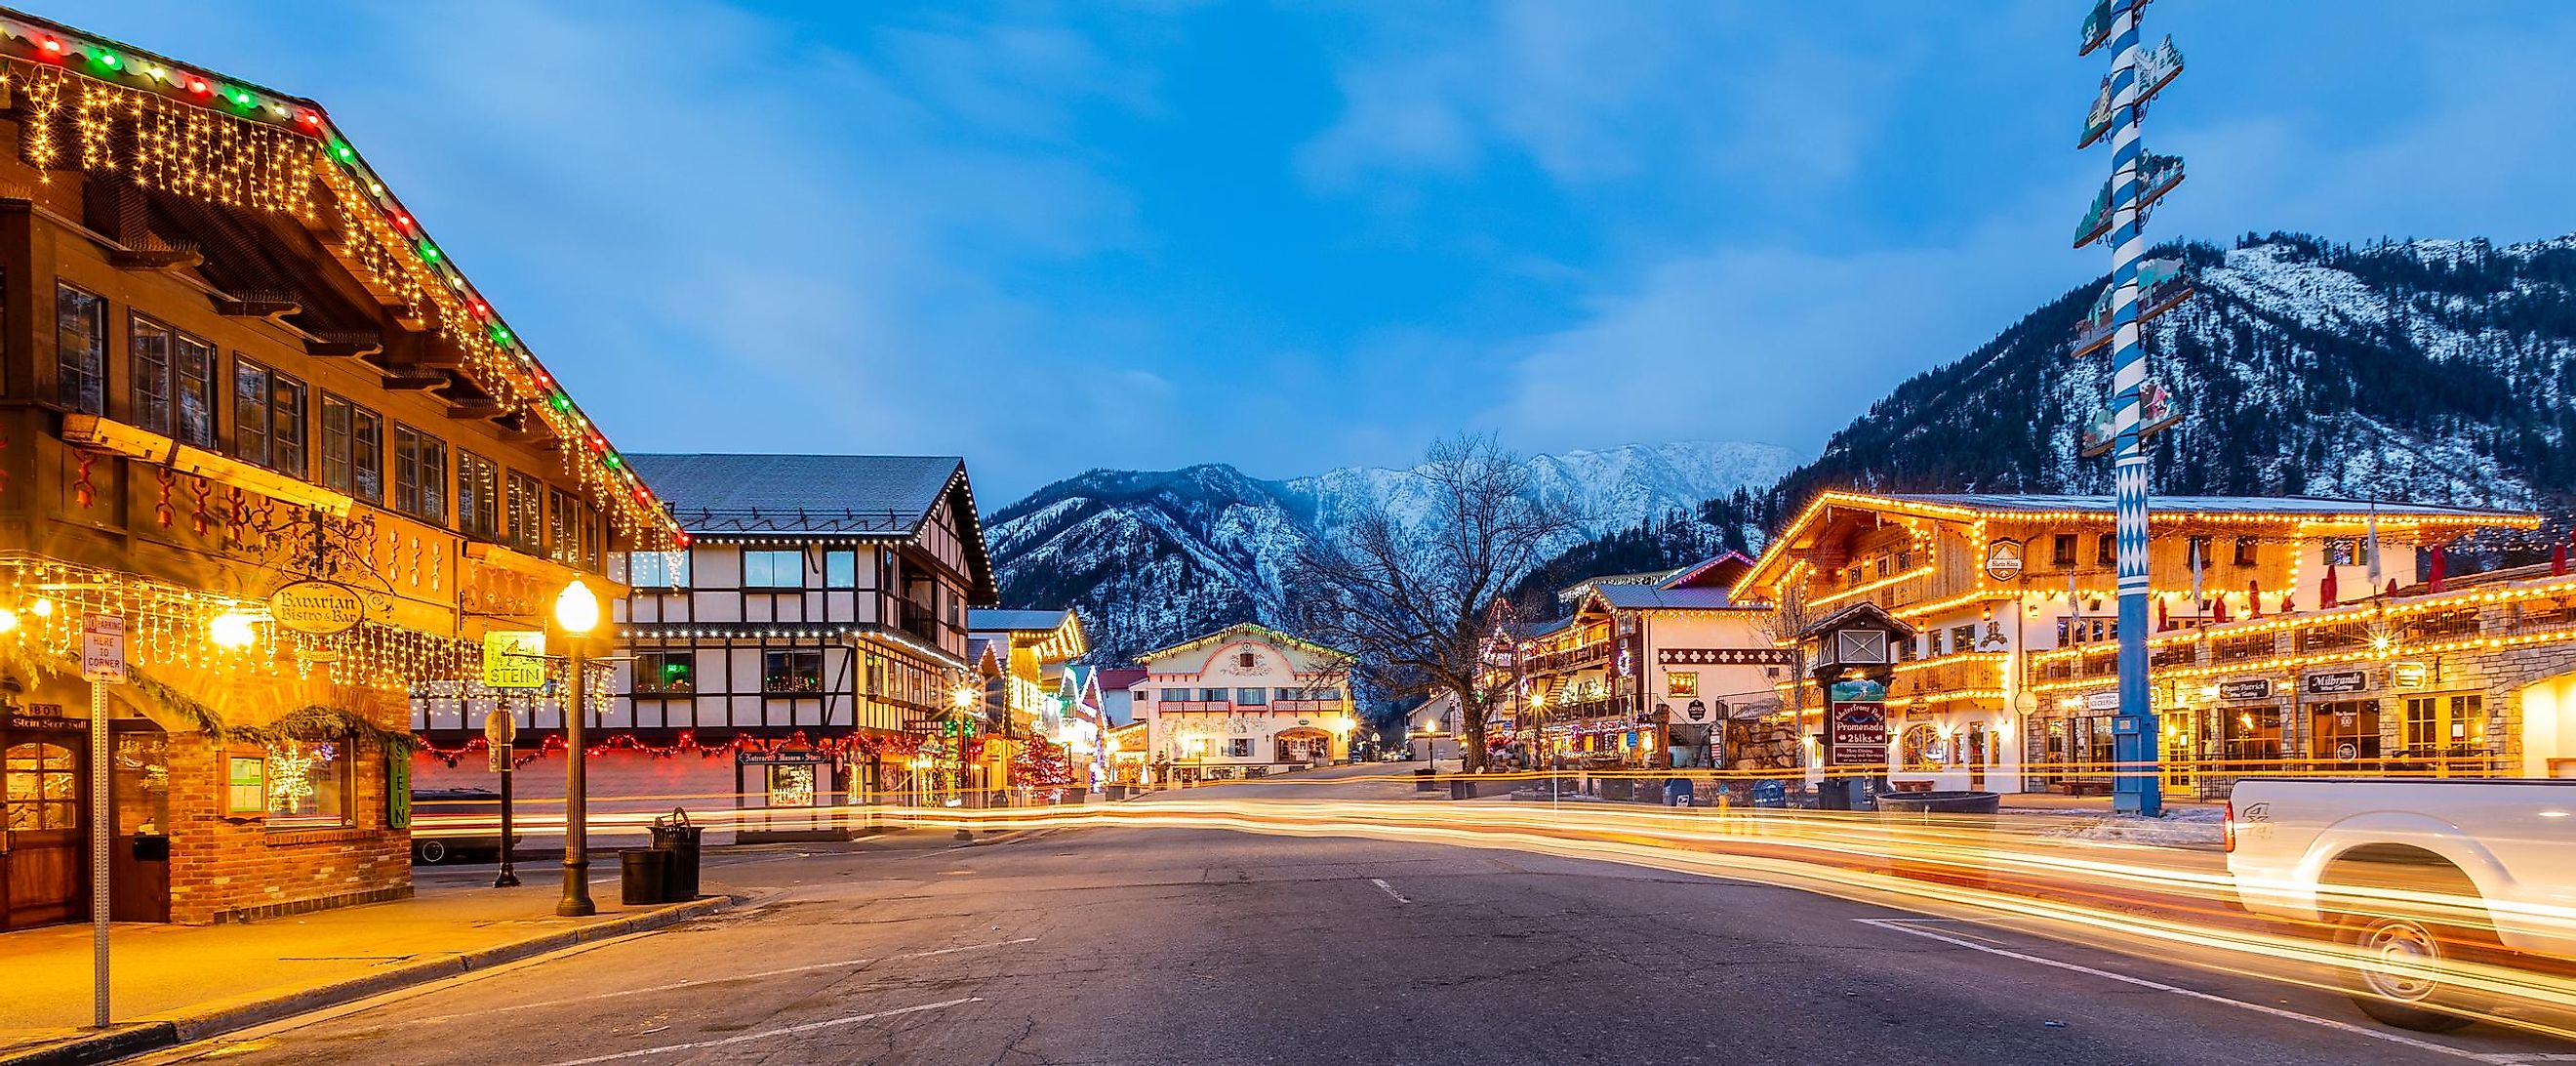 The charming town of Leavenworth, Washington, adorned with a brilliant display of festive lights, creating a magical winter holiday atmosphere. Editorial credit: Mark A Lee / Shutterstock.com